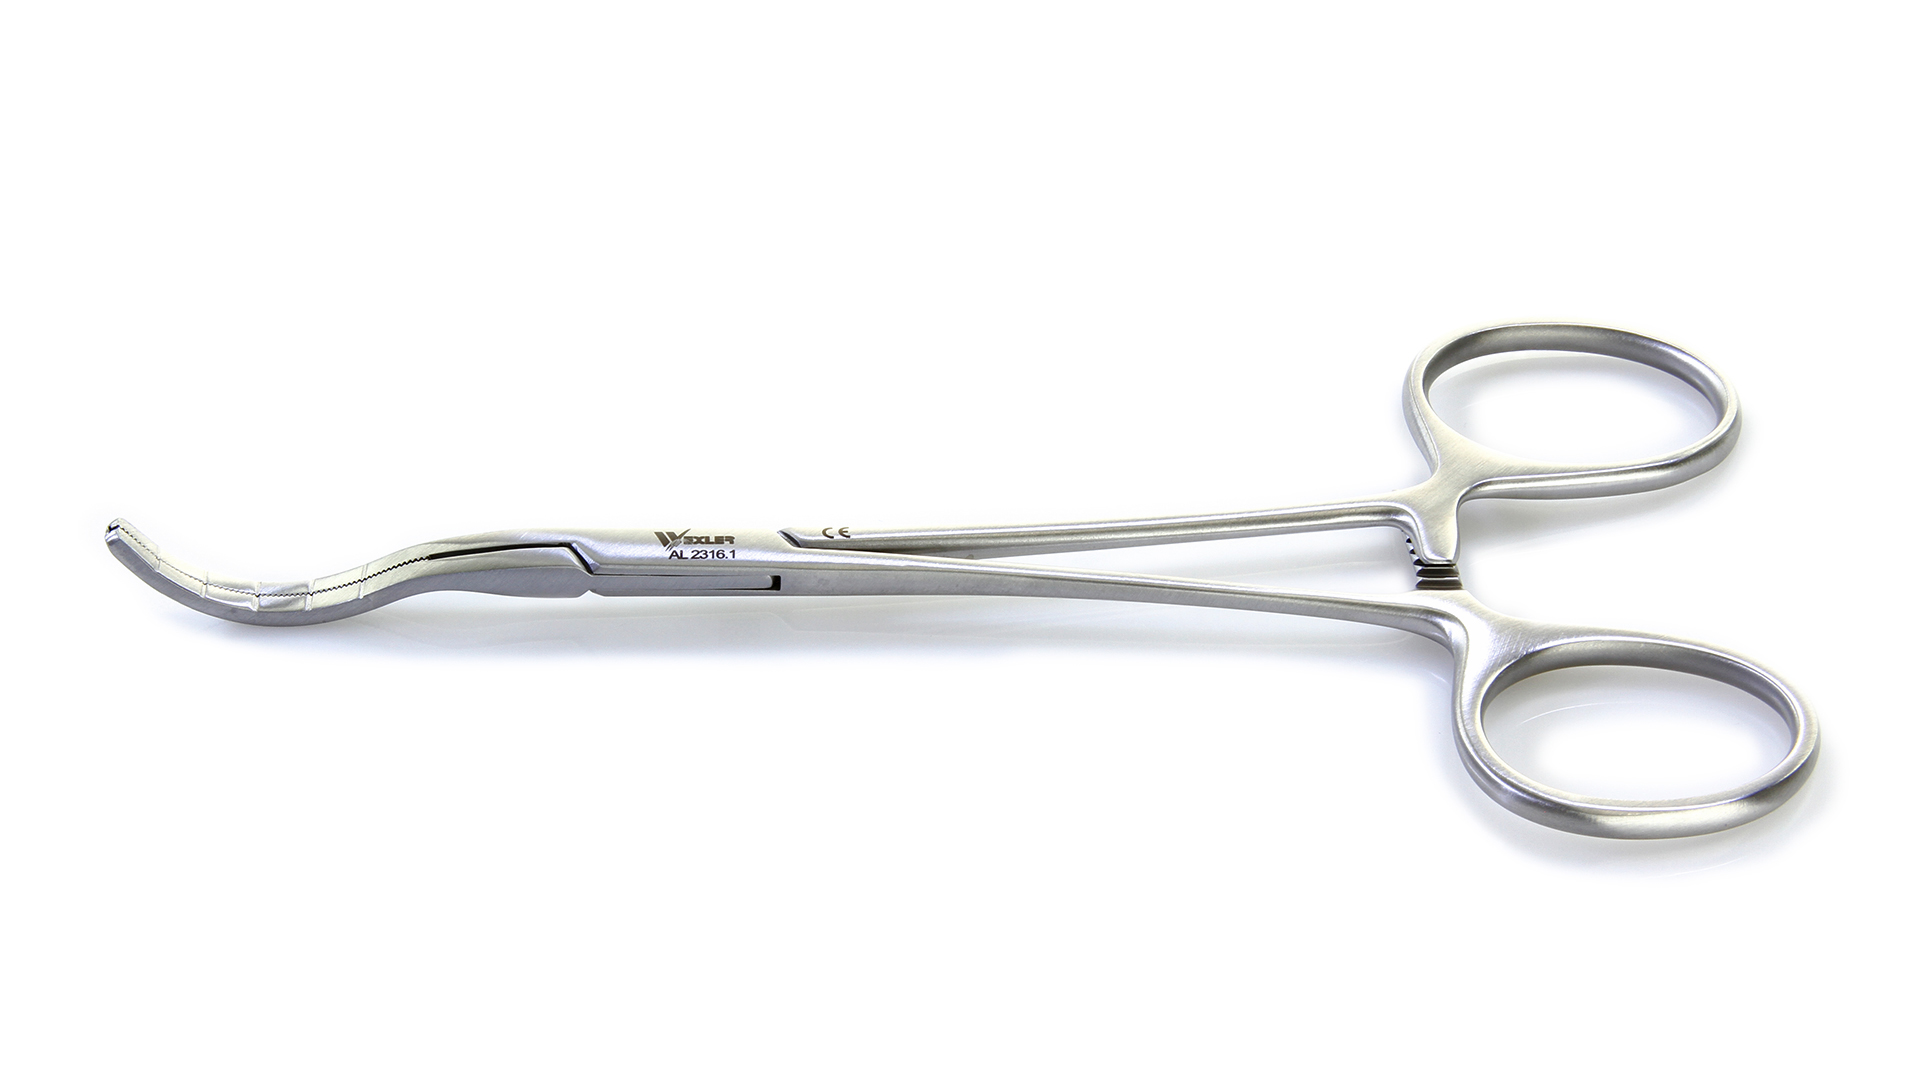 Wexler Baby Vascular Clamp - Spoon Cooley Atraumatic jaws